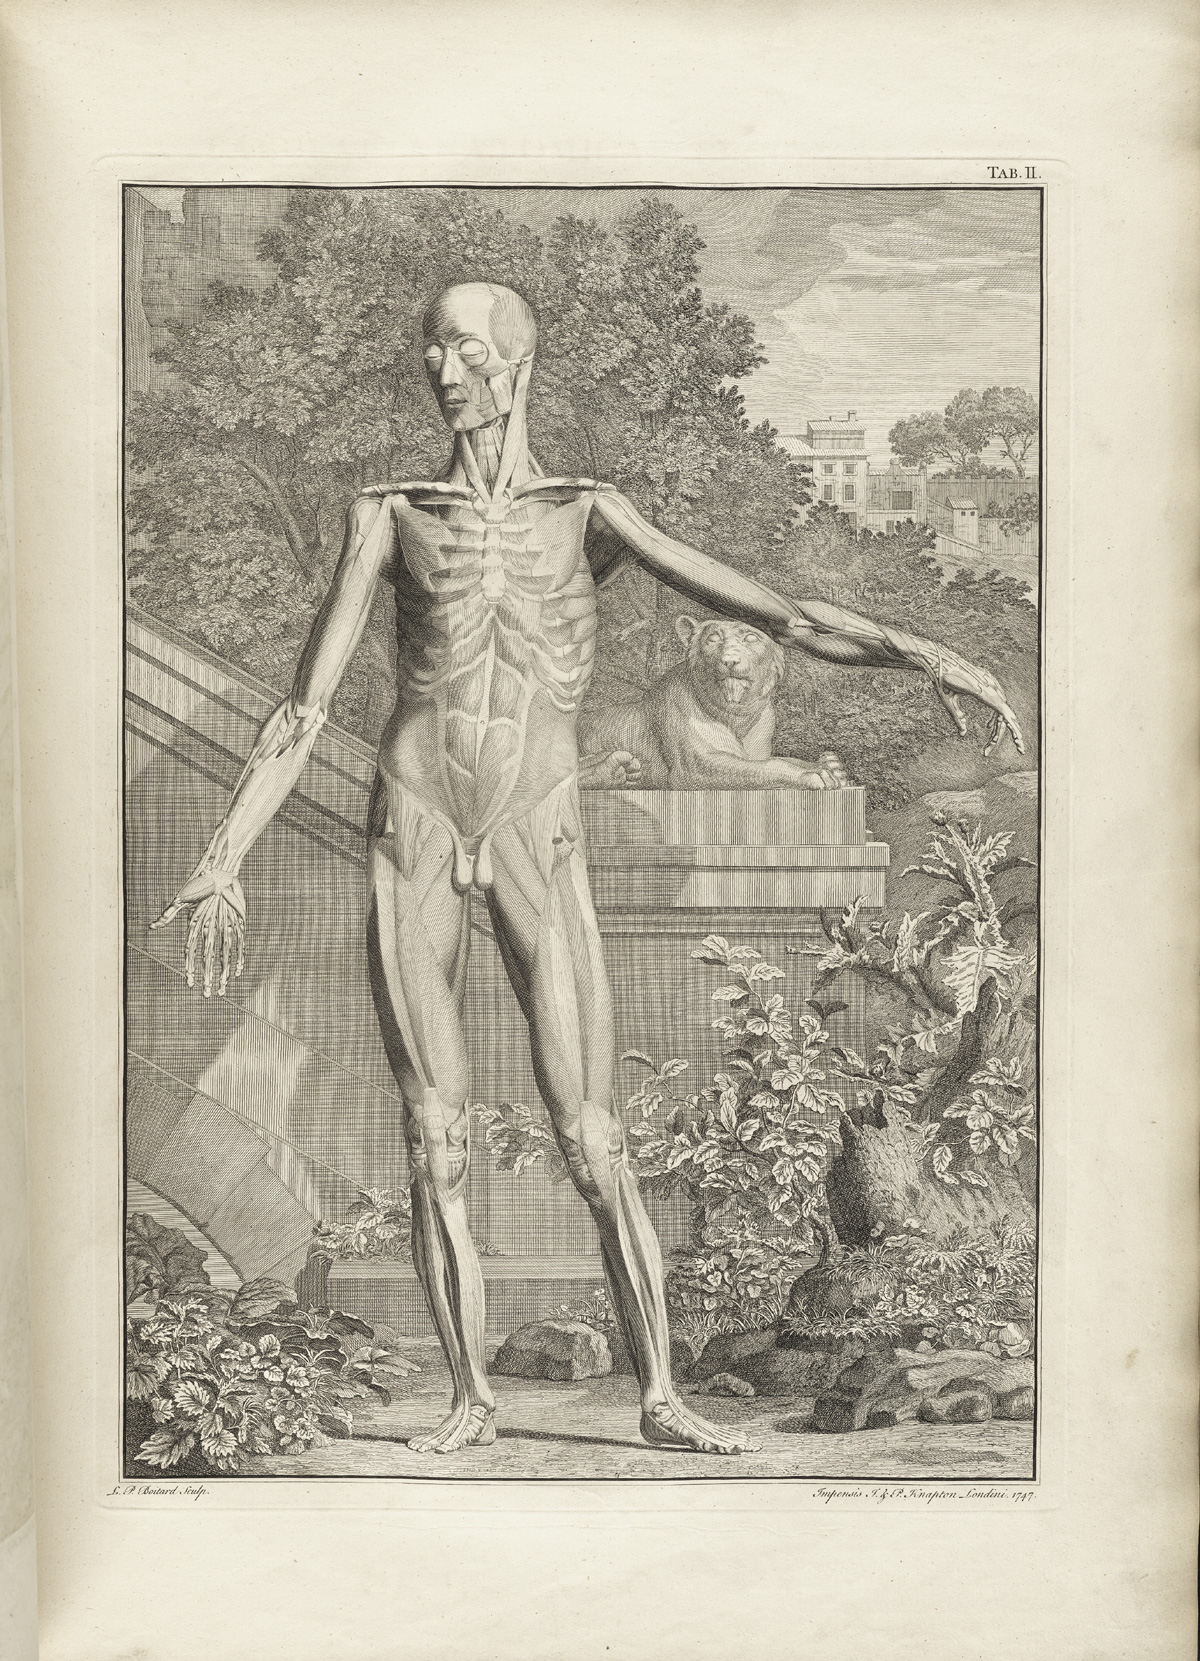 Table 2a of Bernhard Siegfried Albinus' Tabulae sceleti et musculorum corporis humani, featuring a full length frontal view of a flayed corpse in a landscape with its left arm is extended.